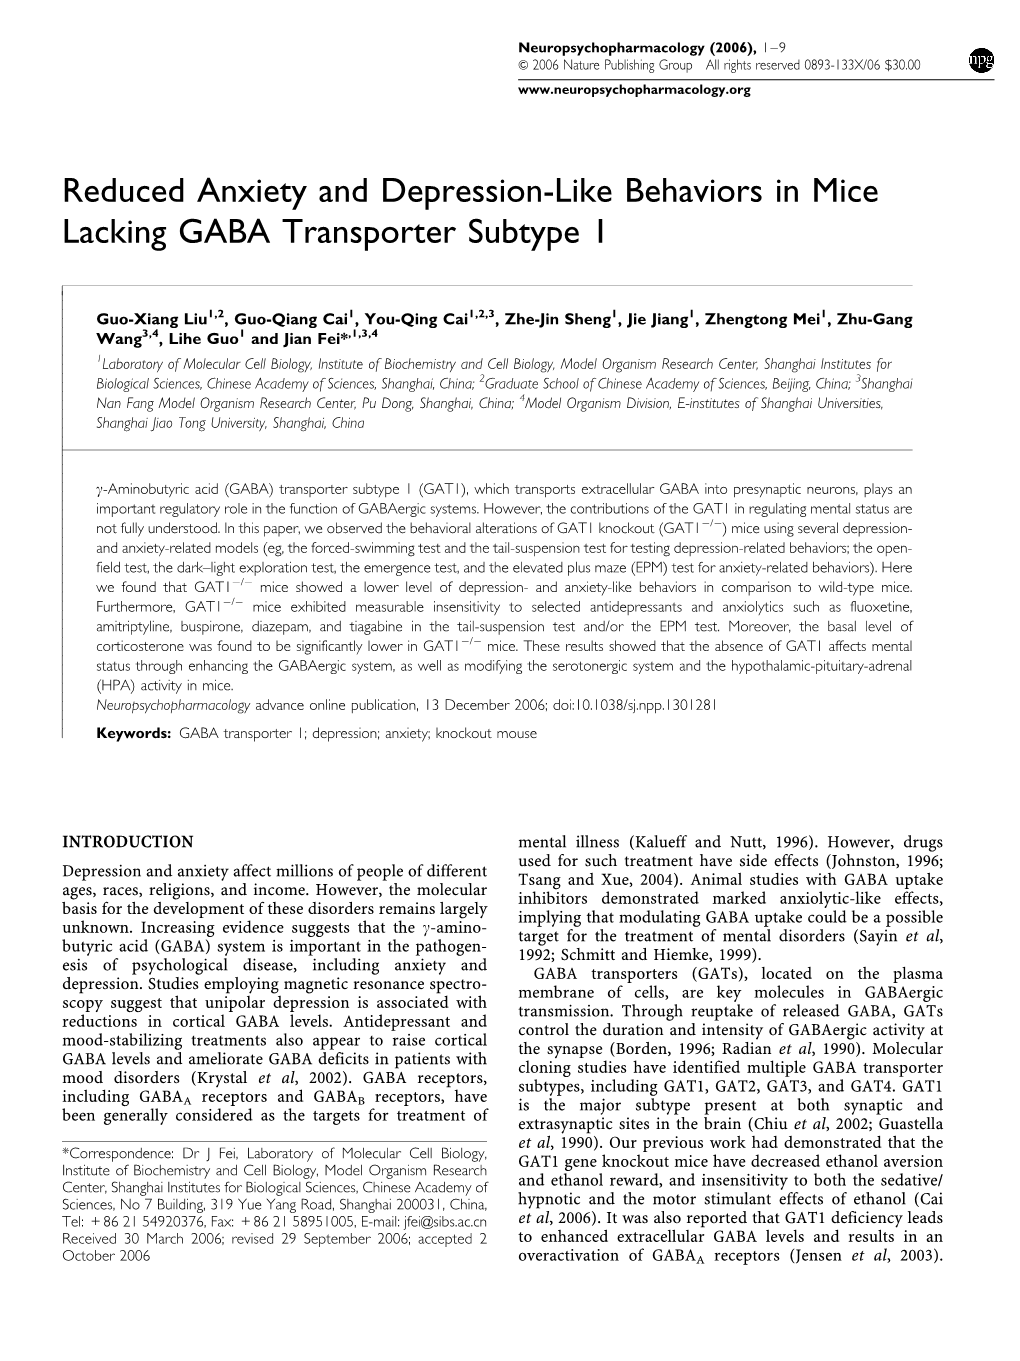 Reduced Anxiety and Depression-Like Behaviors in Mice Lacking GABA Transporter Subtype 1